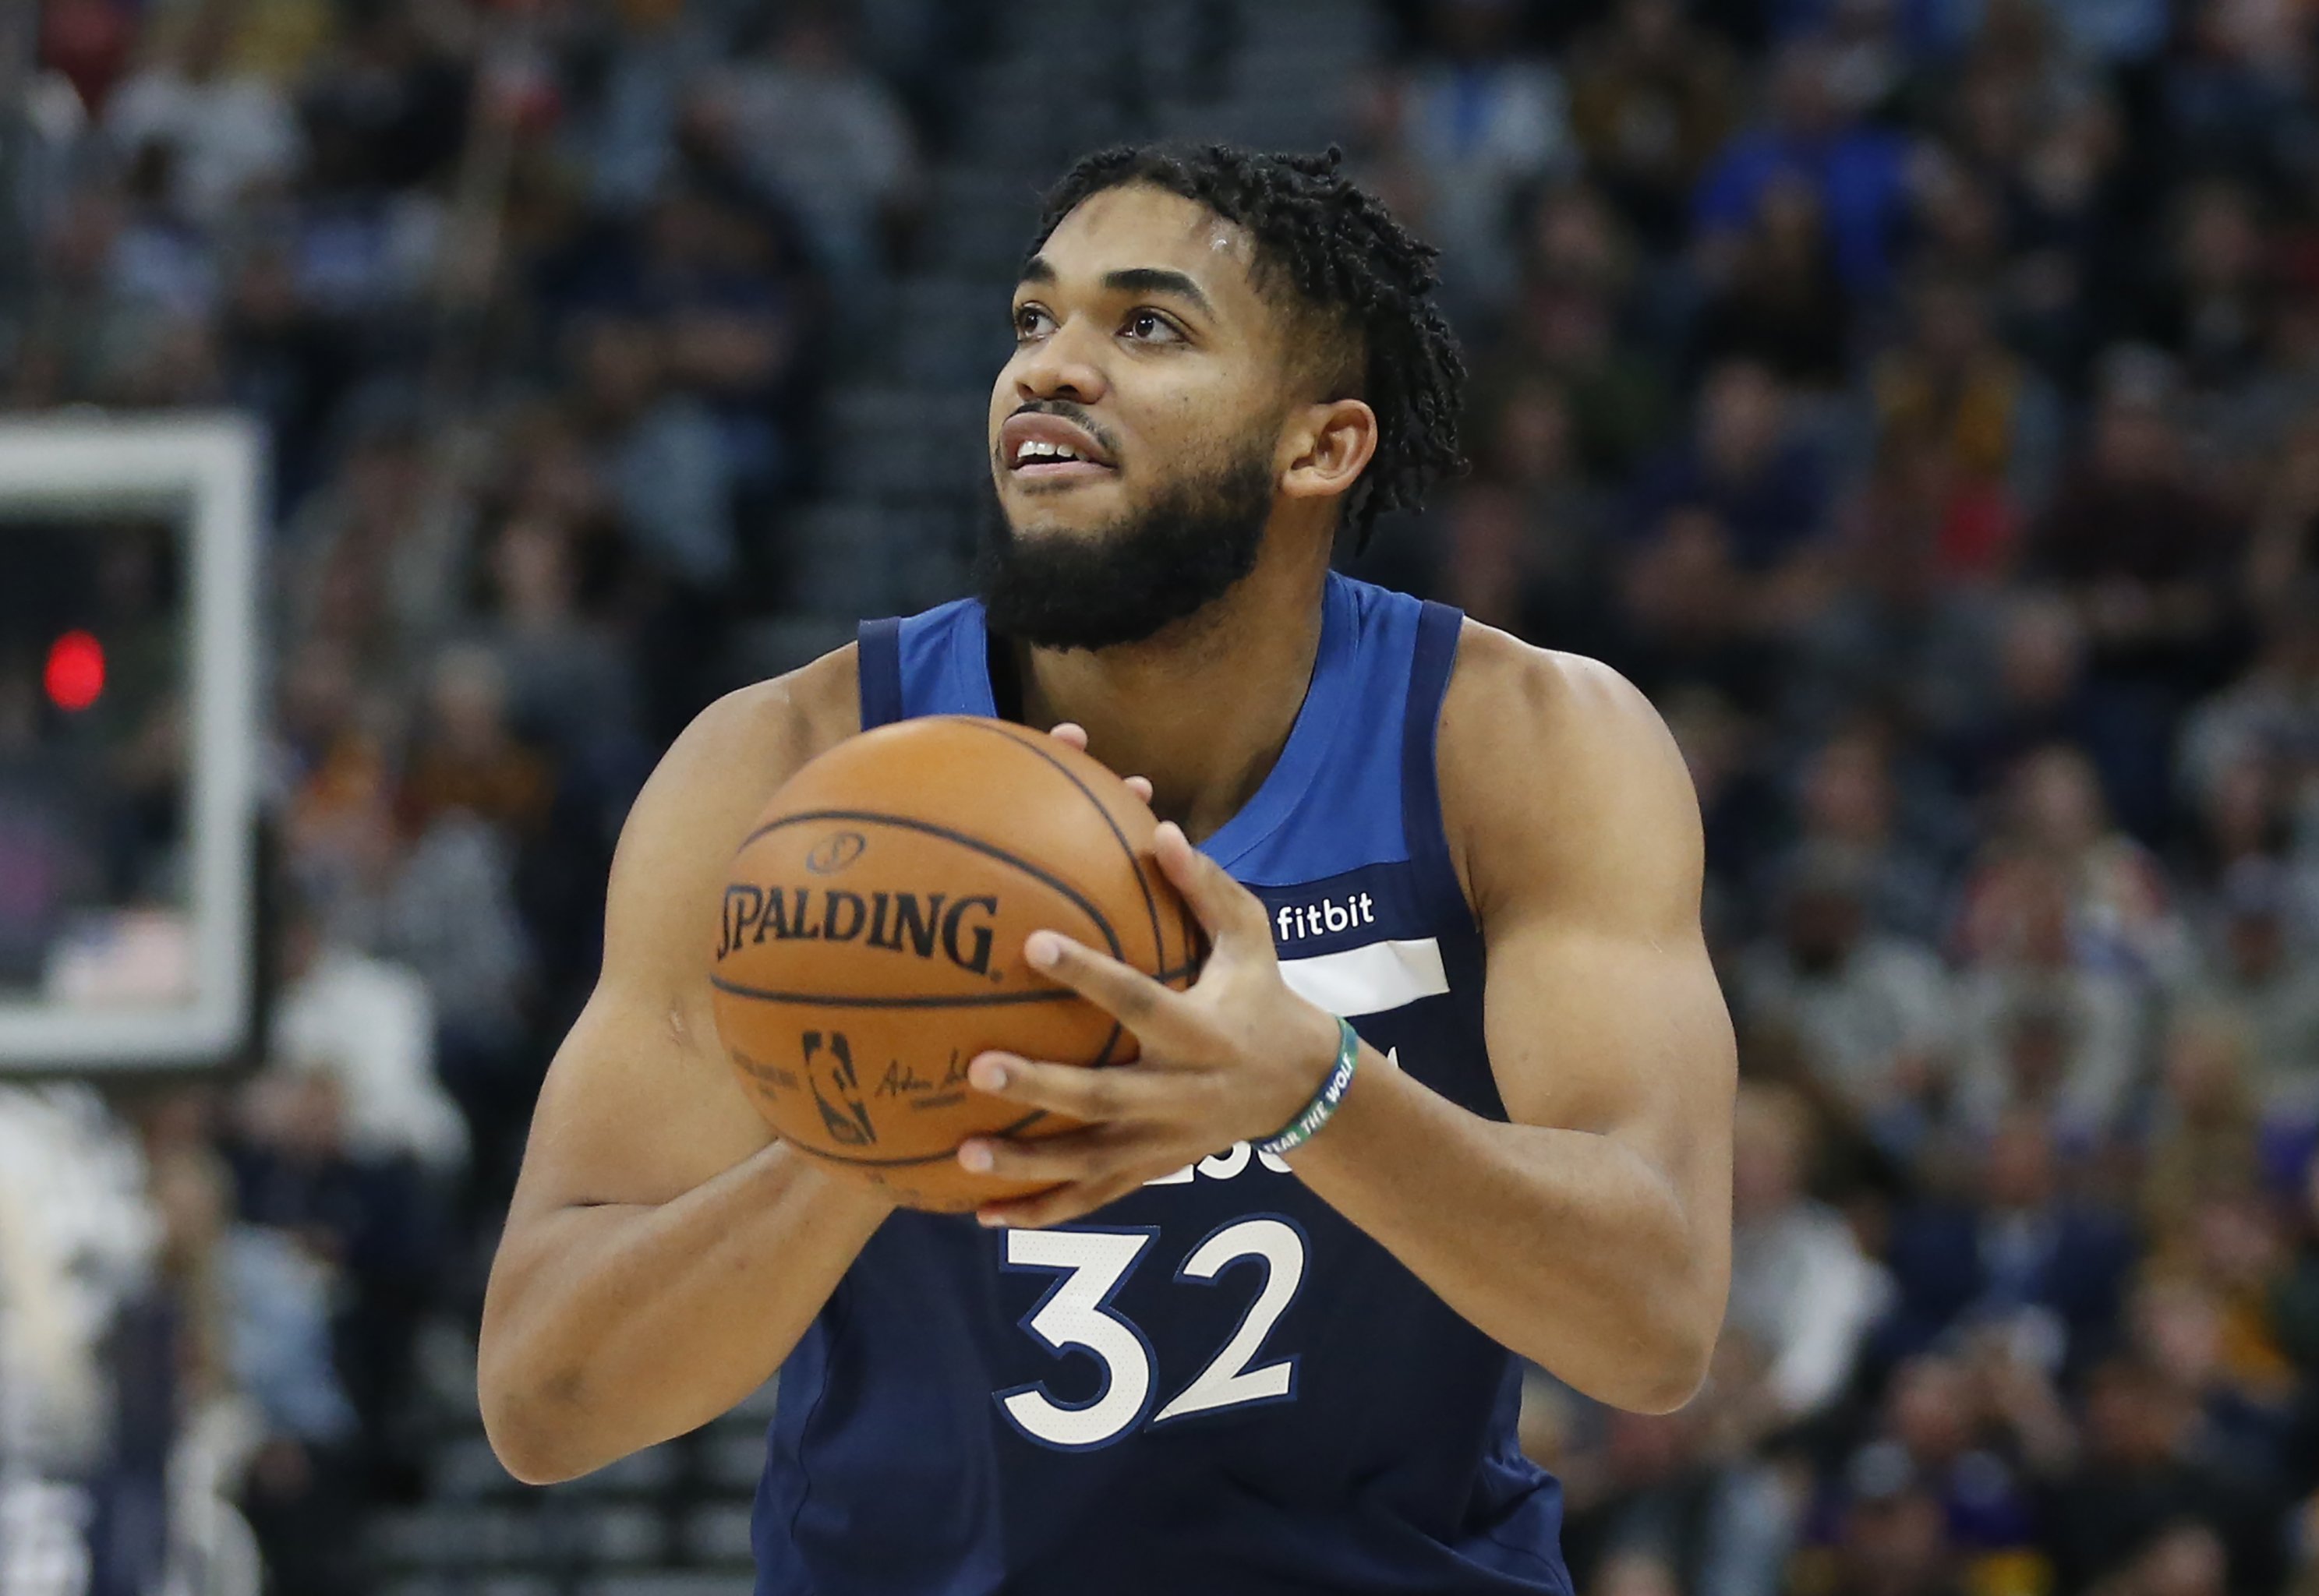 Record Luka Doncic-Kyrie Irving numbers haven't bumped Mavericks